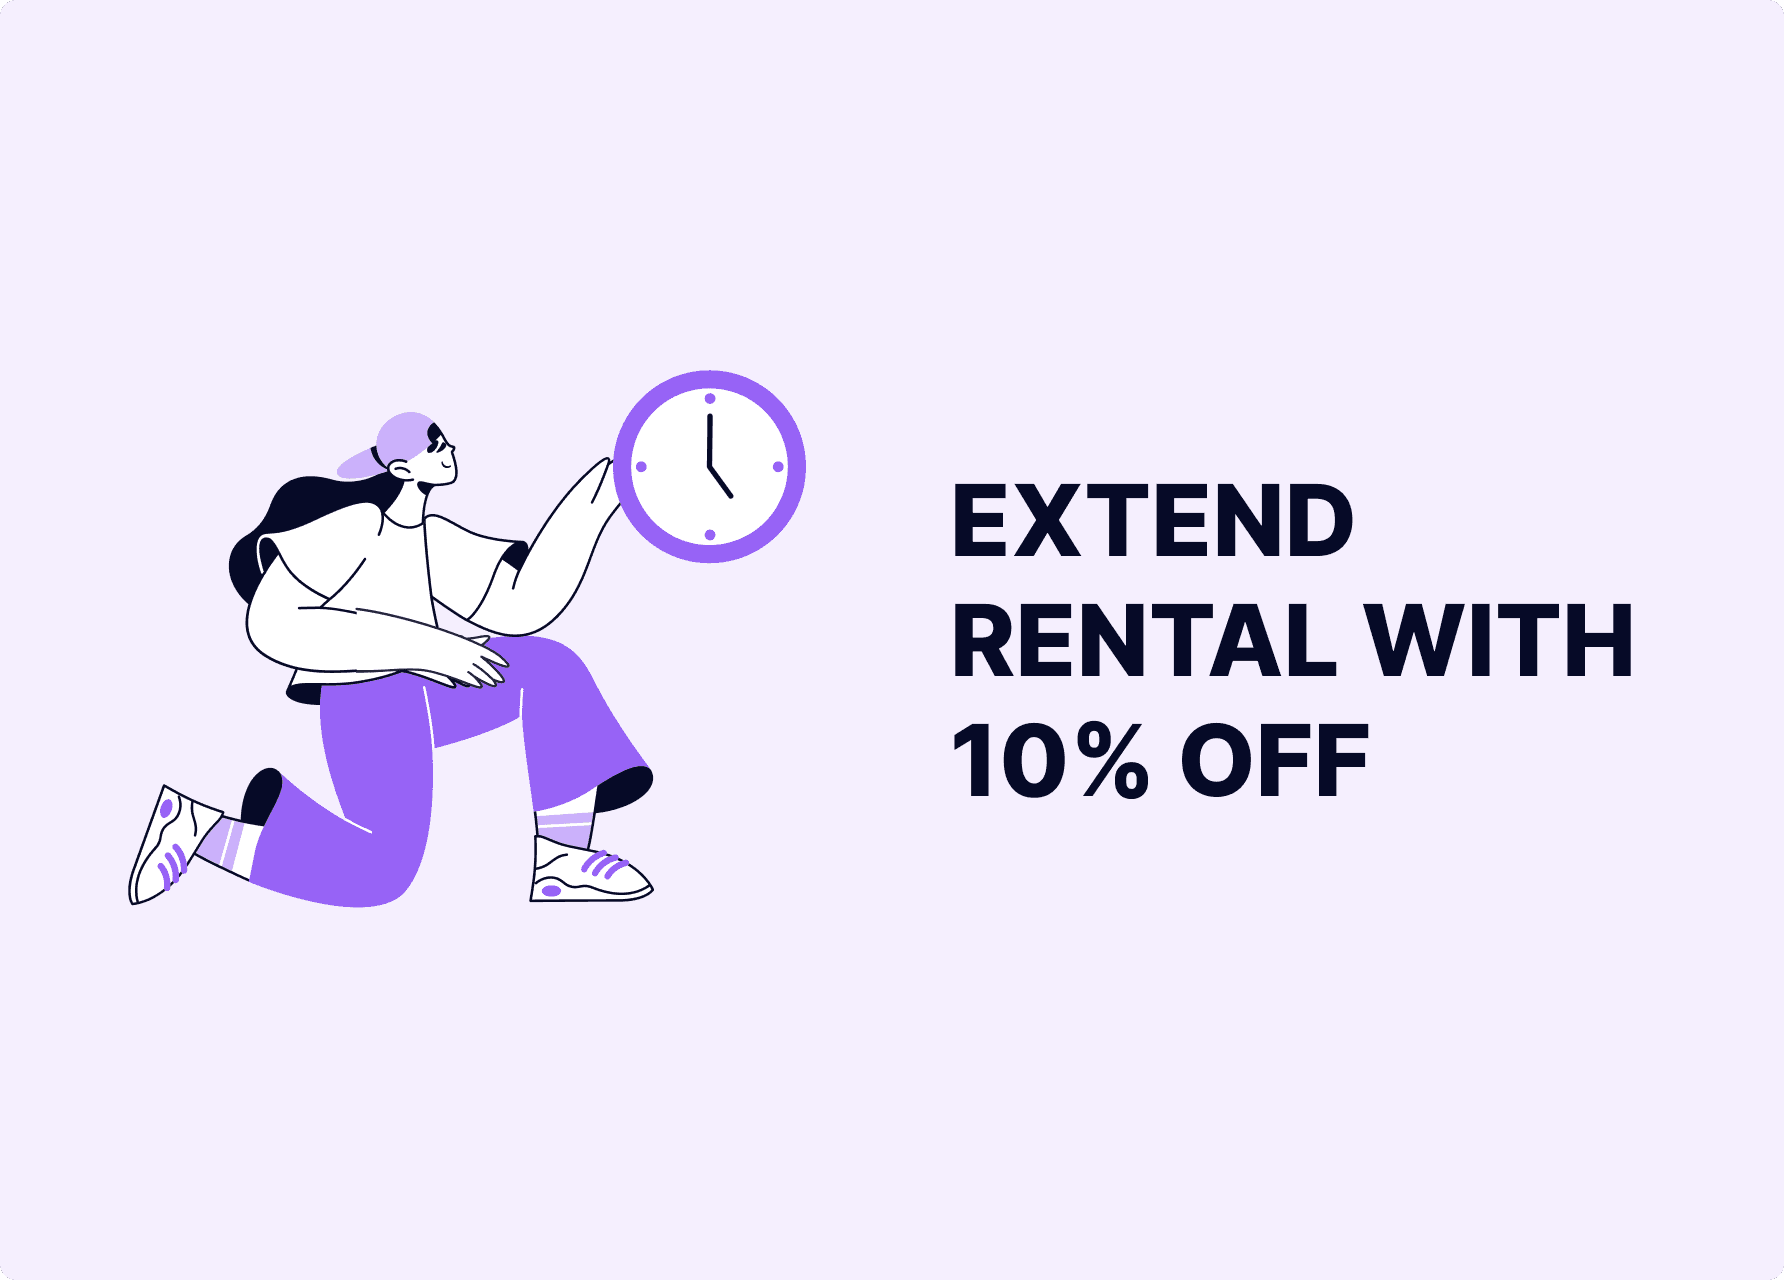 All rental extension orders are 10% off with the code EXTEND10 💜